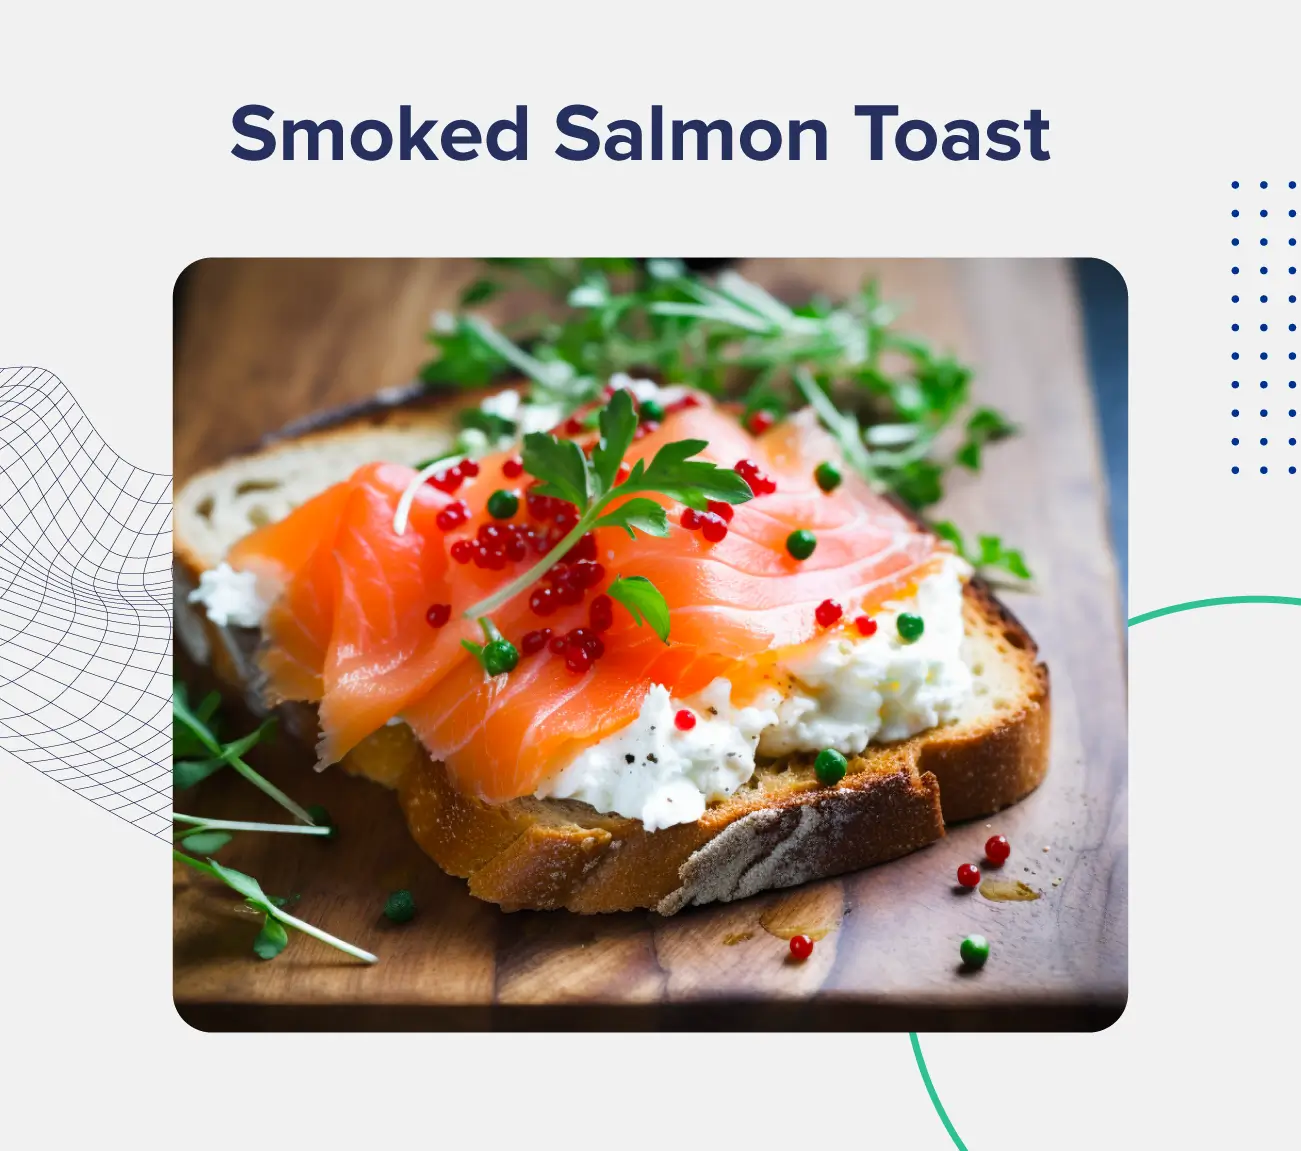 A graphic entitled "Smoked Salmon Toast" featuring an image of a thin piece of toast with salmon, cream cheese, dill, and more